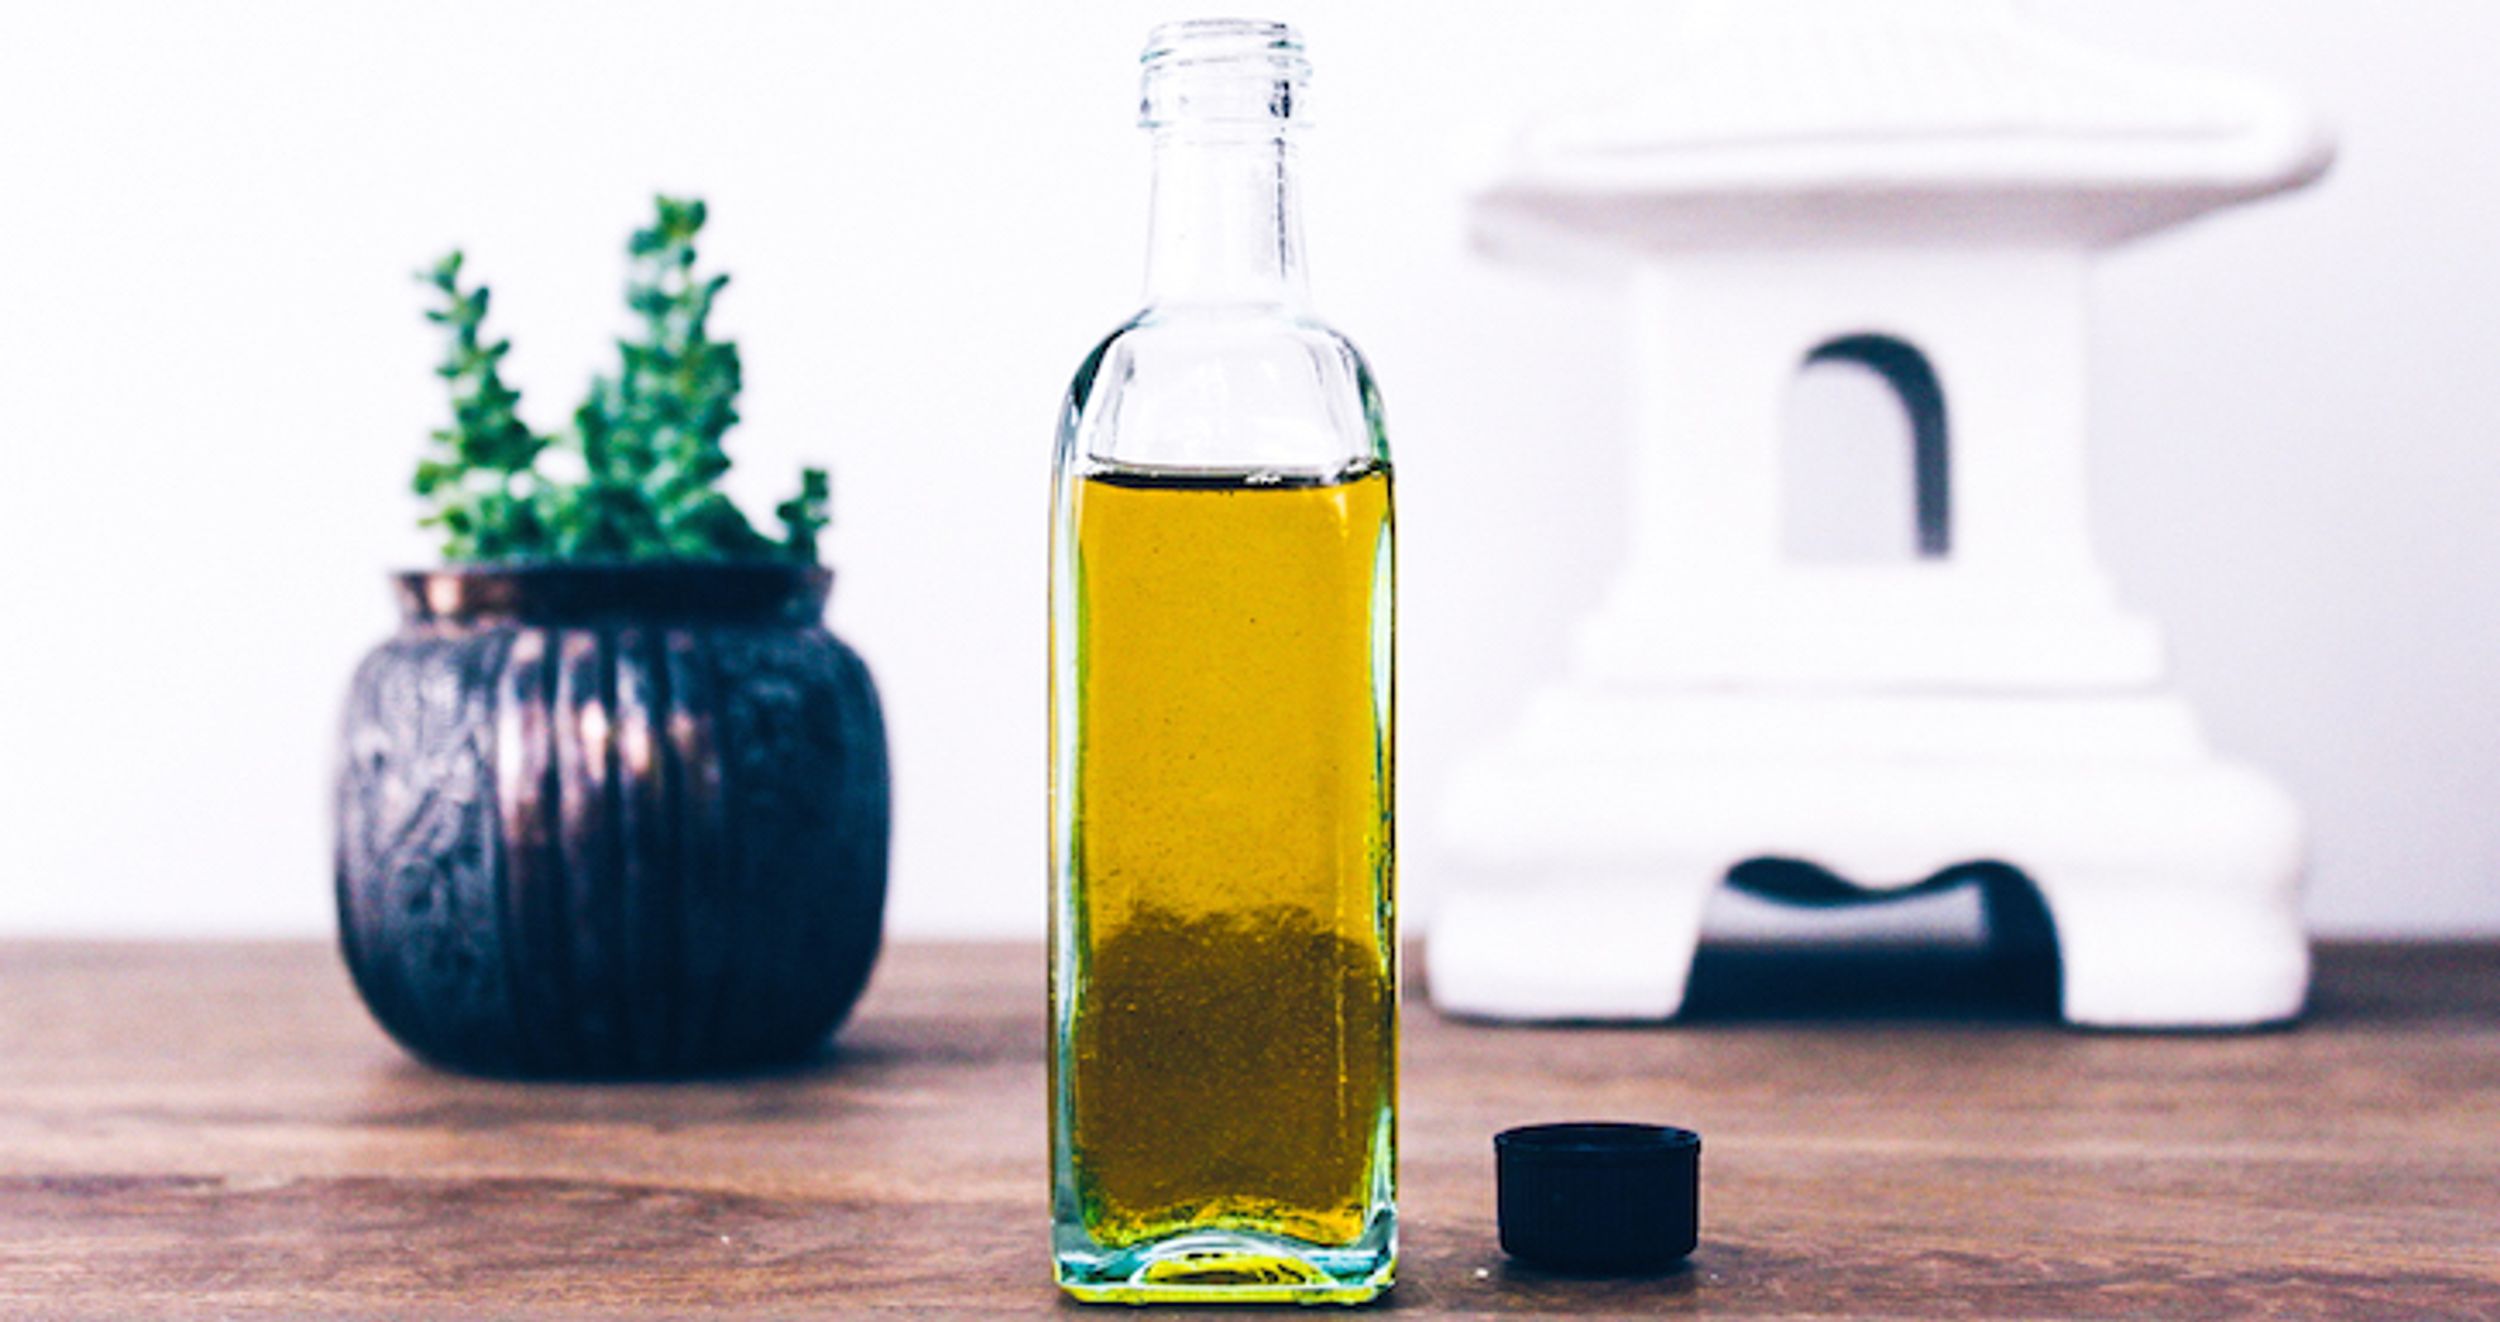 How To Make Your Own All-Natural Body Oil